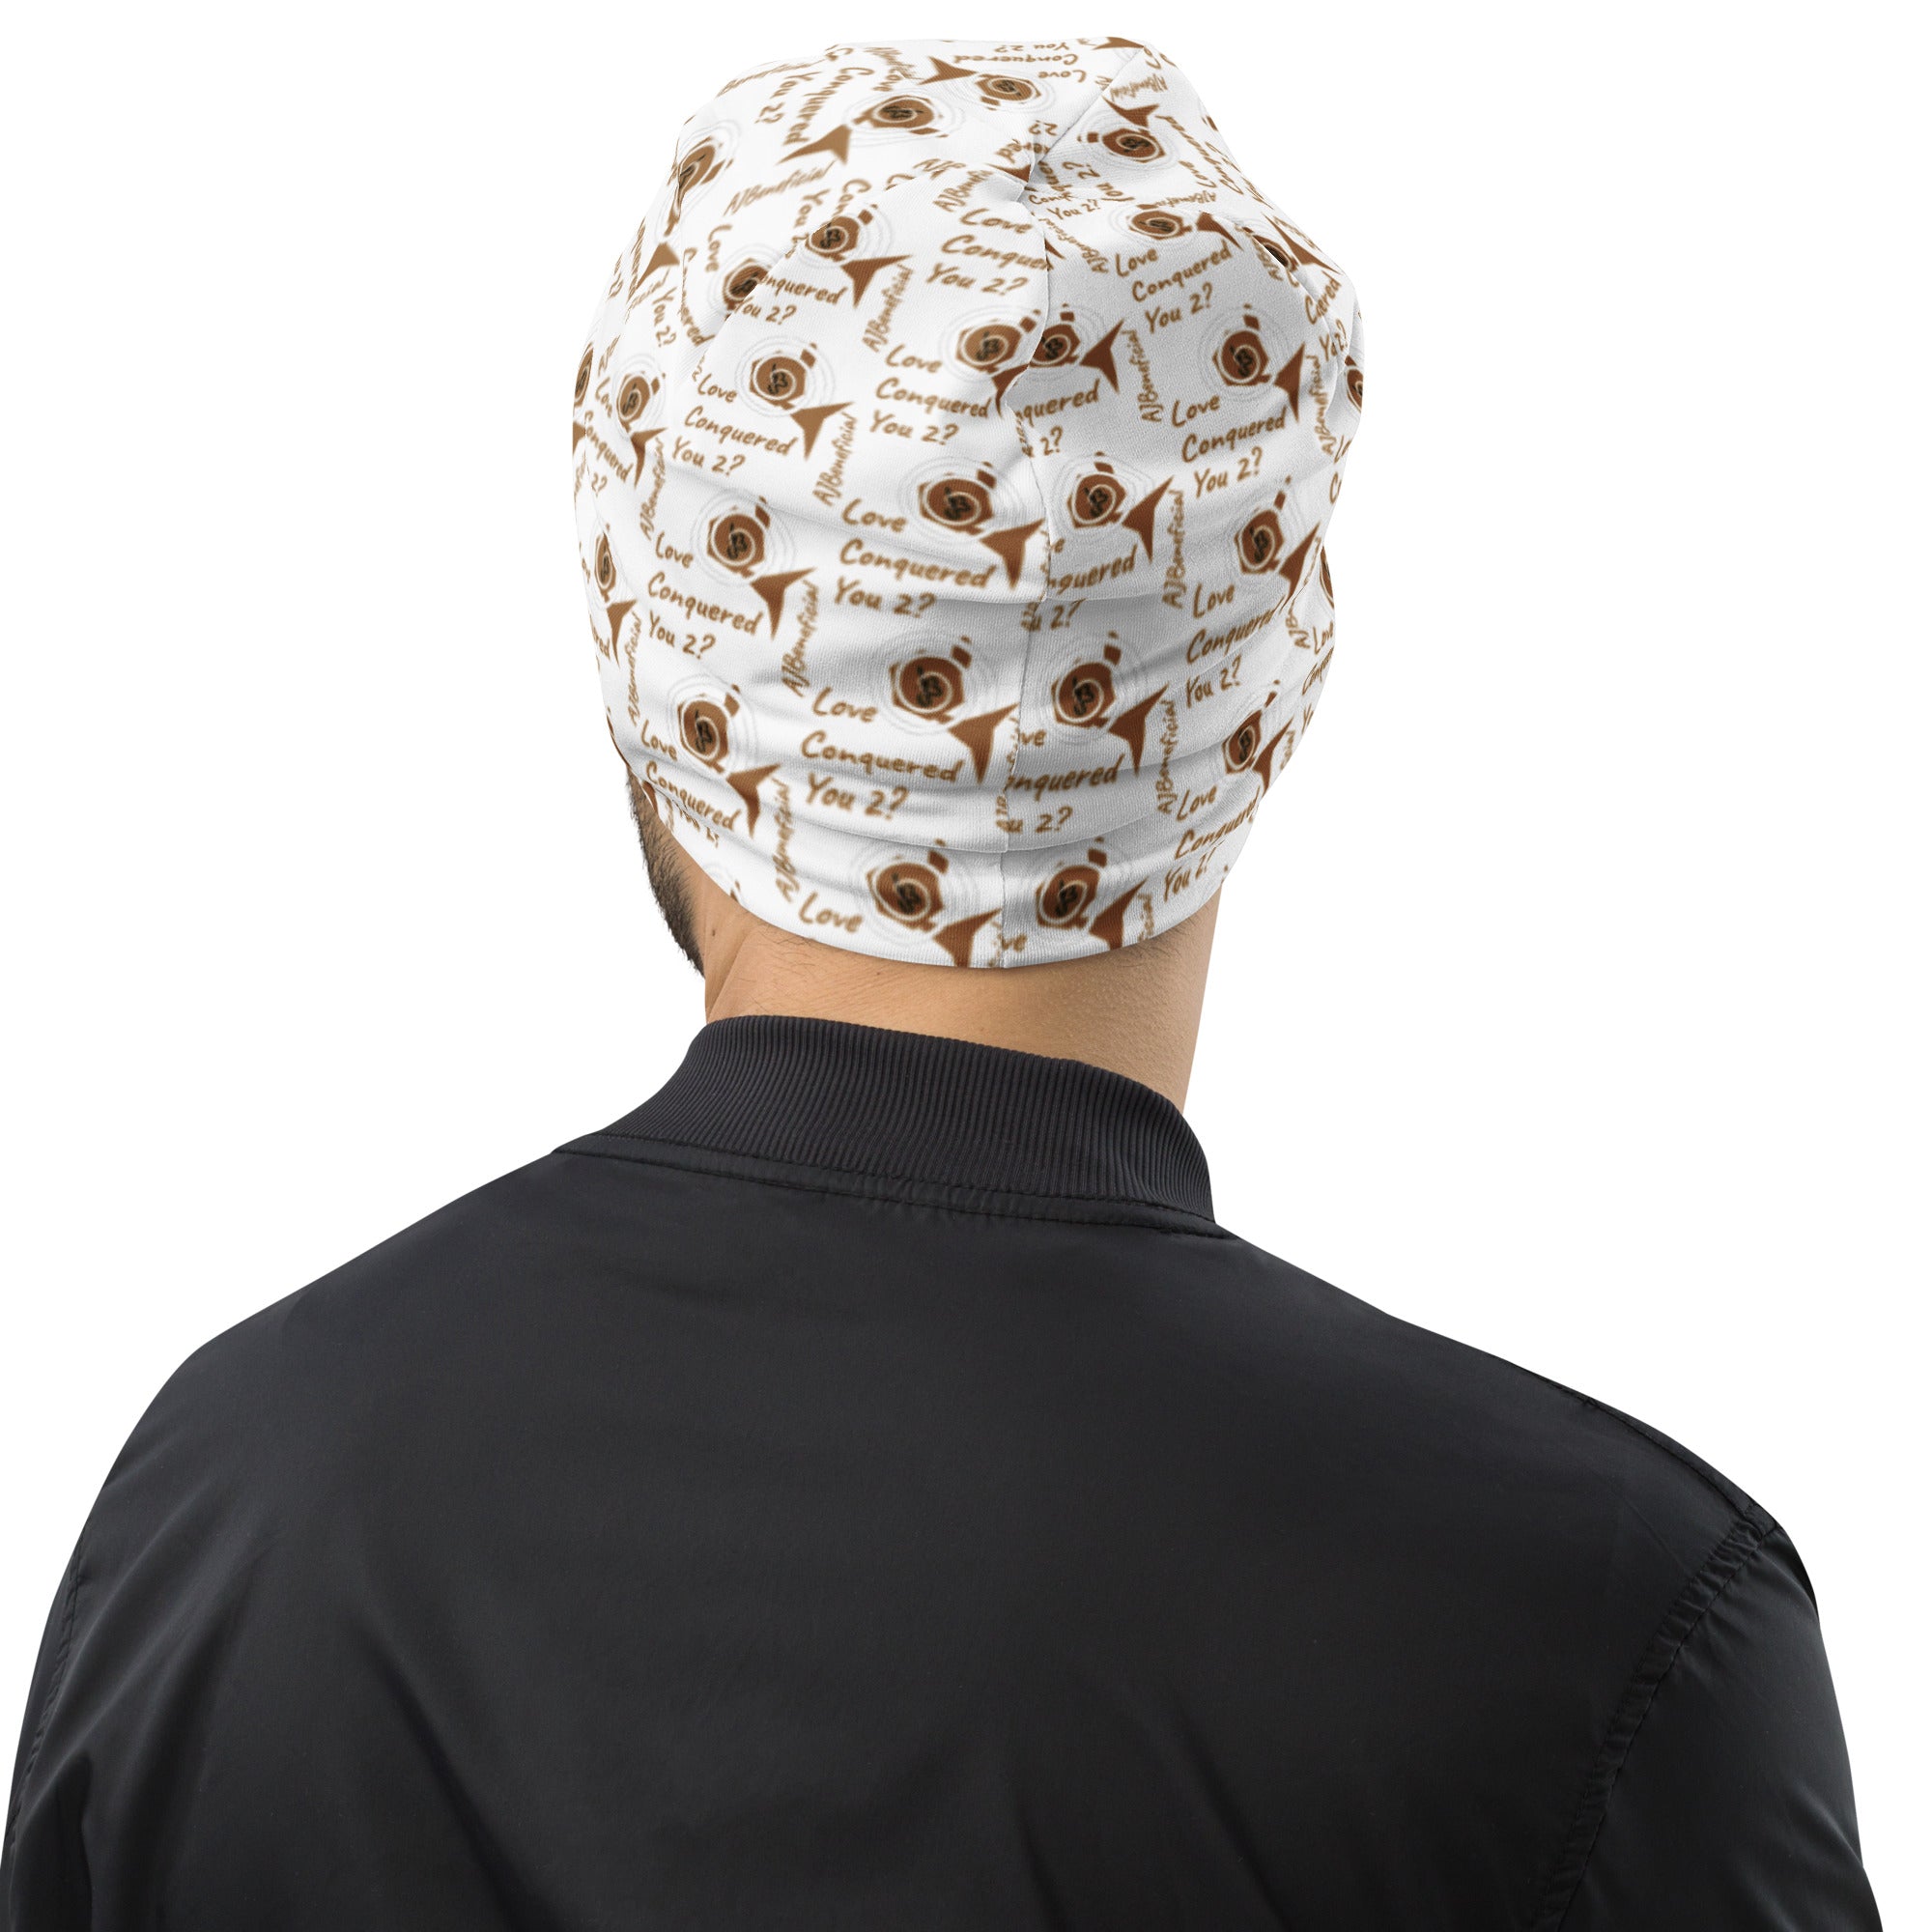 AJBeneficial Love Conquered White Beanie Adult